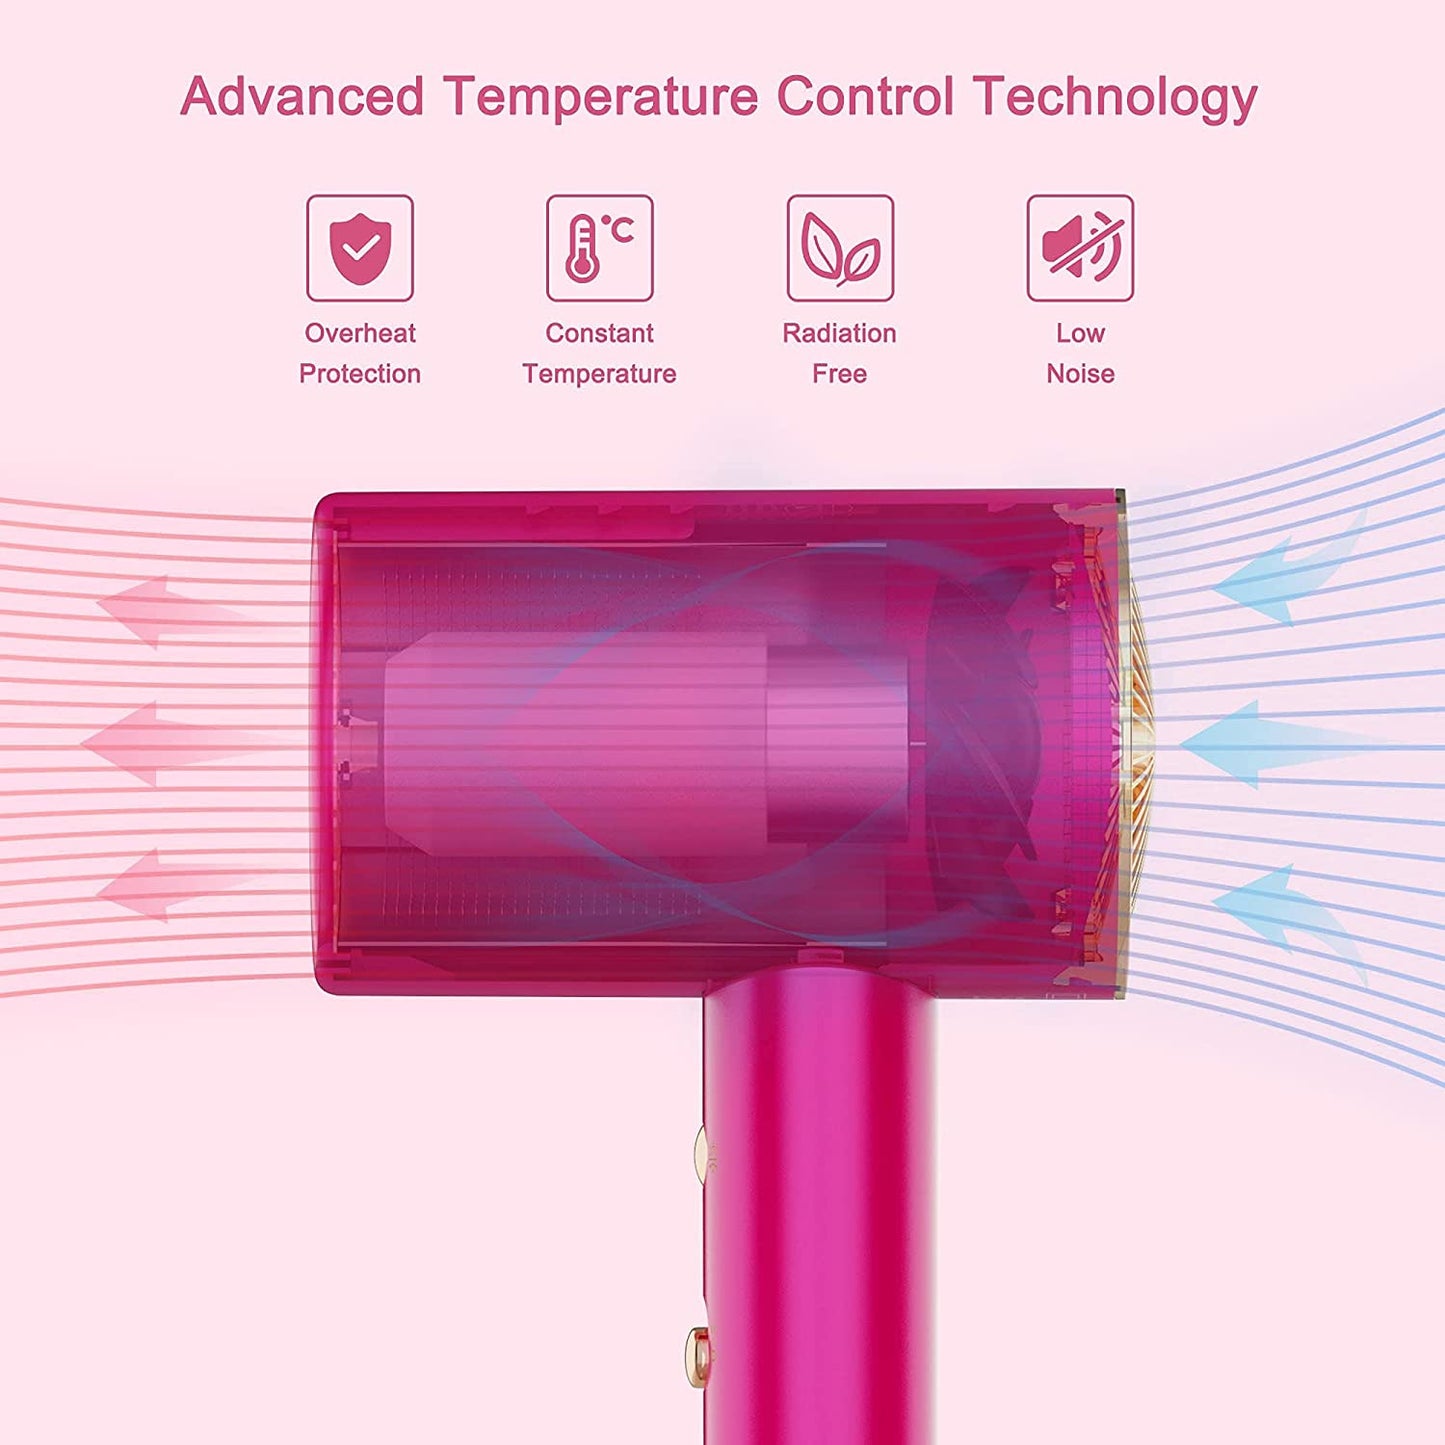 Water Ionic Hair Dryer 1800W Blow Dryer with Magnetic Nozzle (Pink)